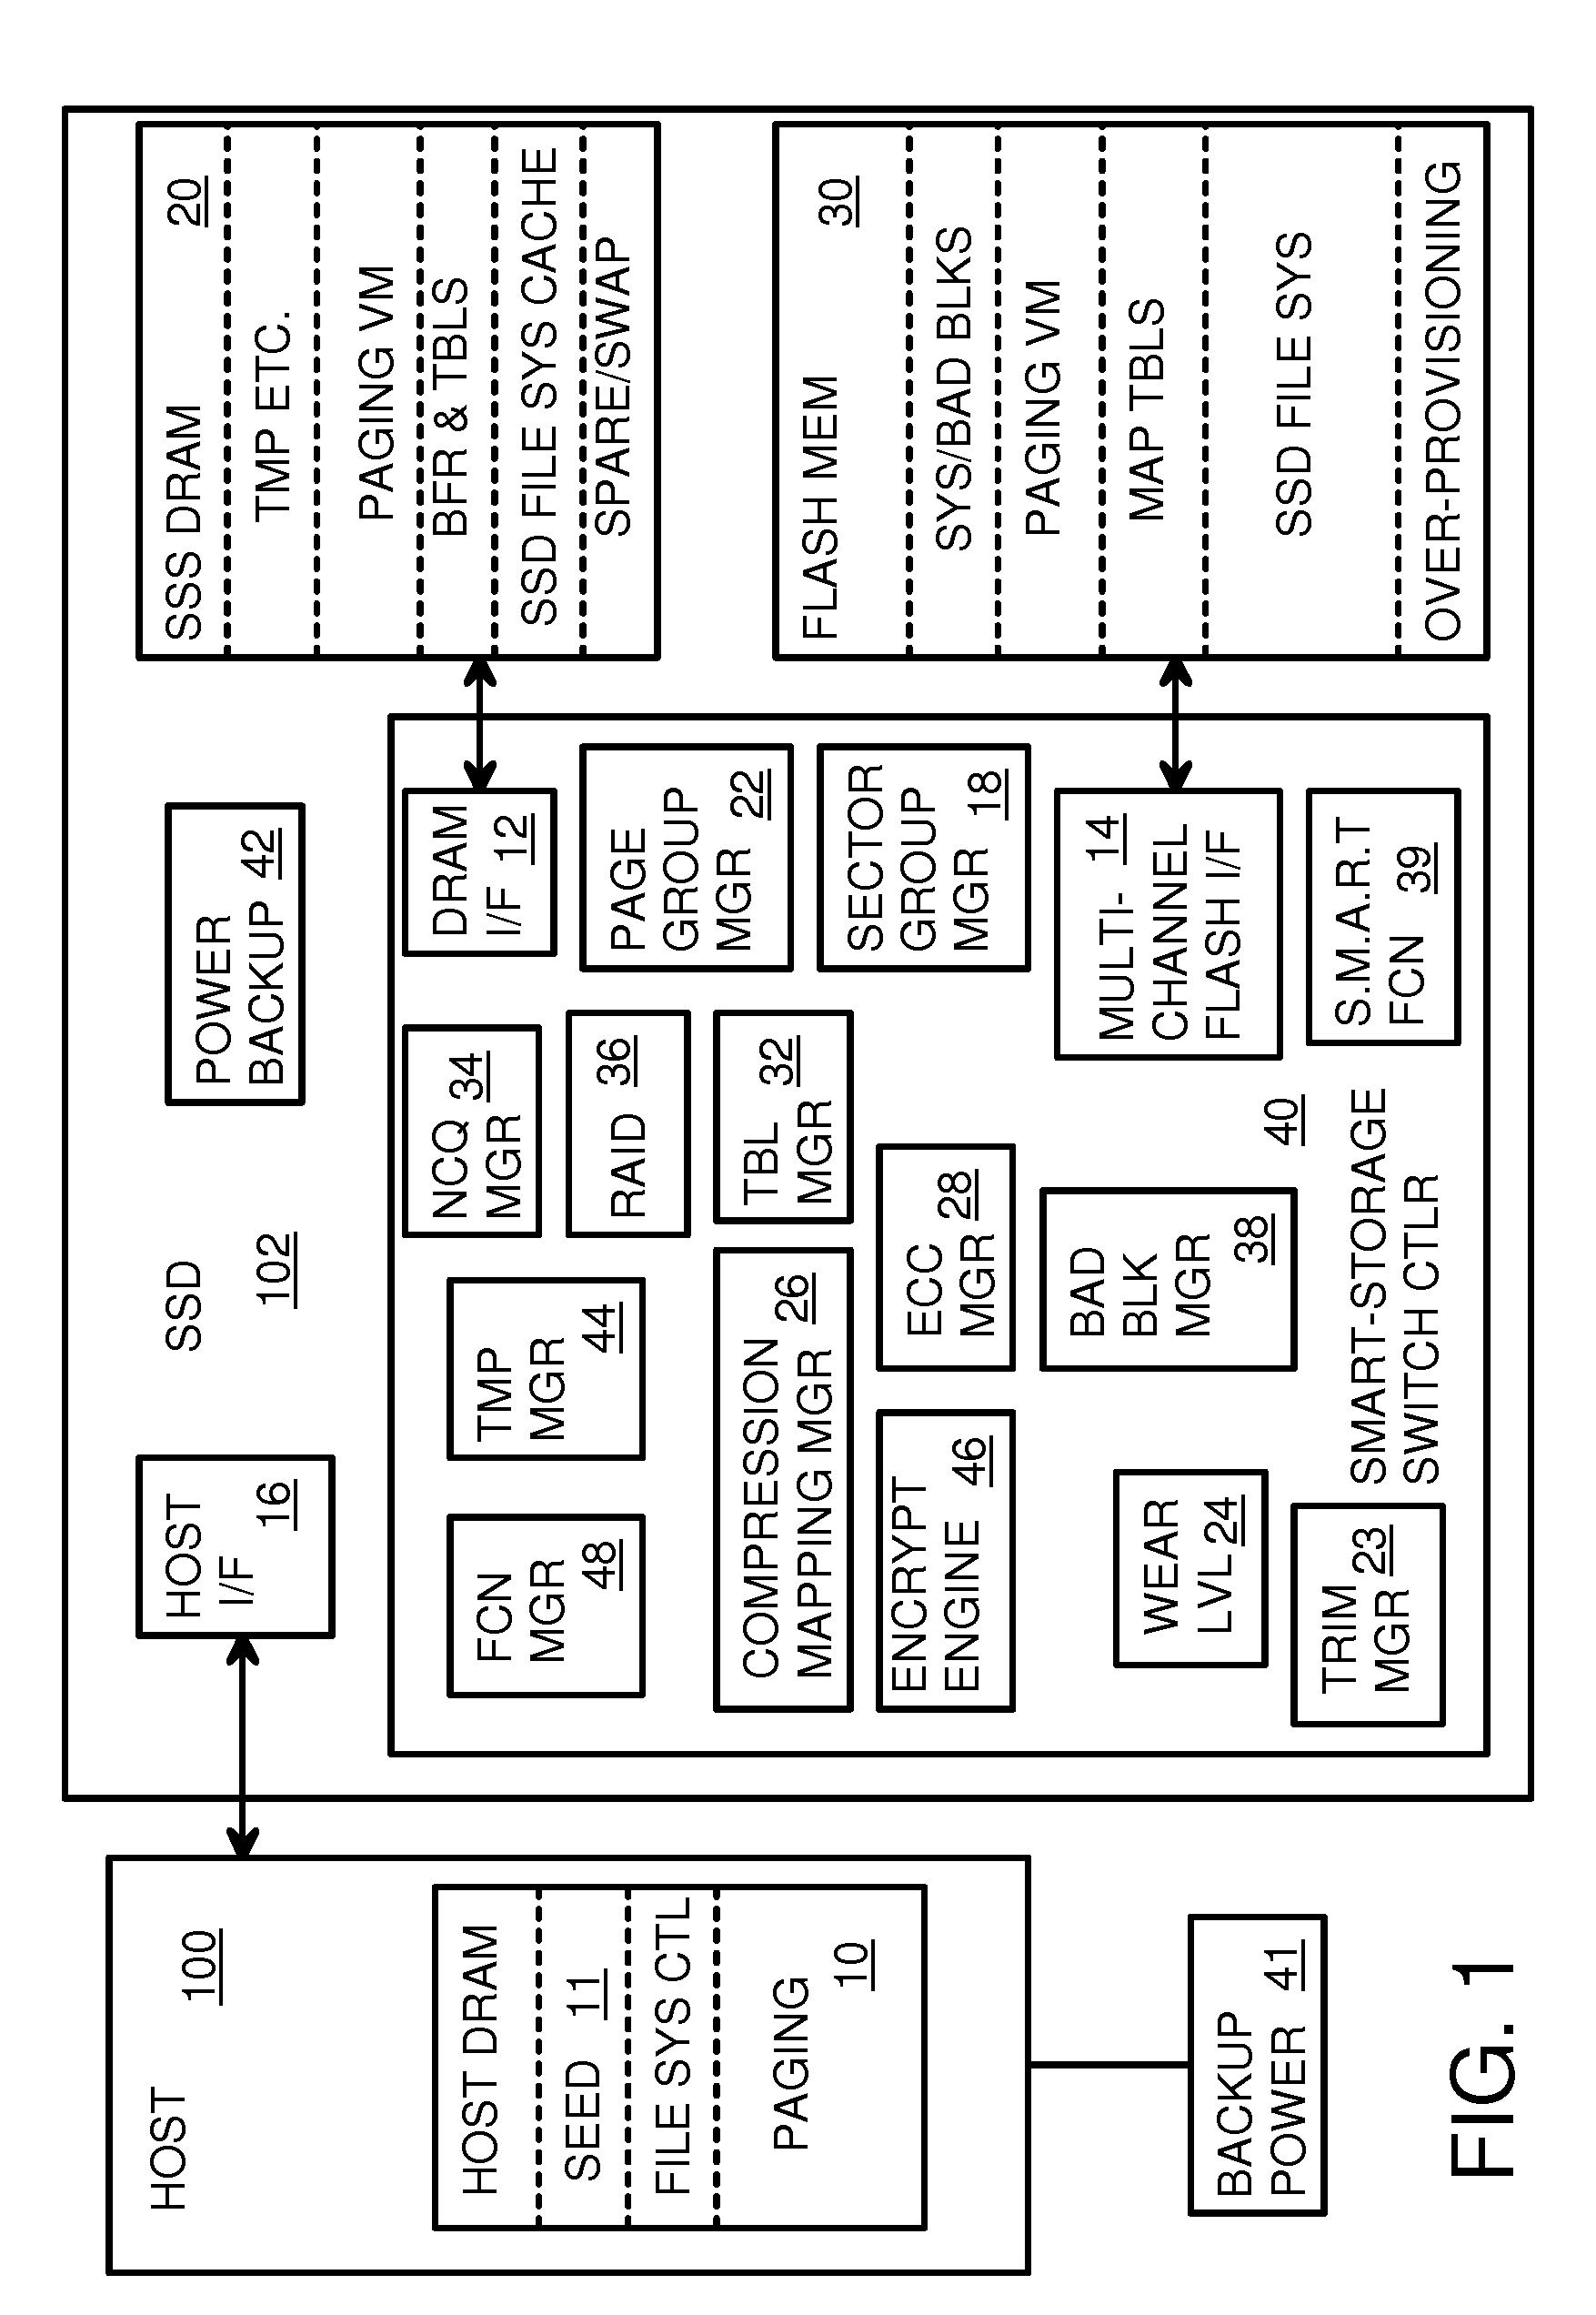 Super-endurance solid-state drive with endurance translation layer (ETL) and diversion of temp files for reduced flash wear